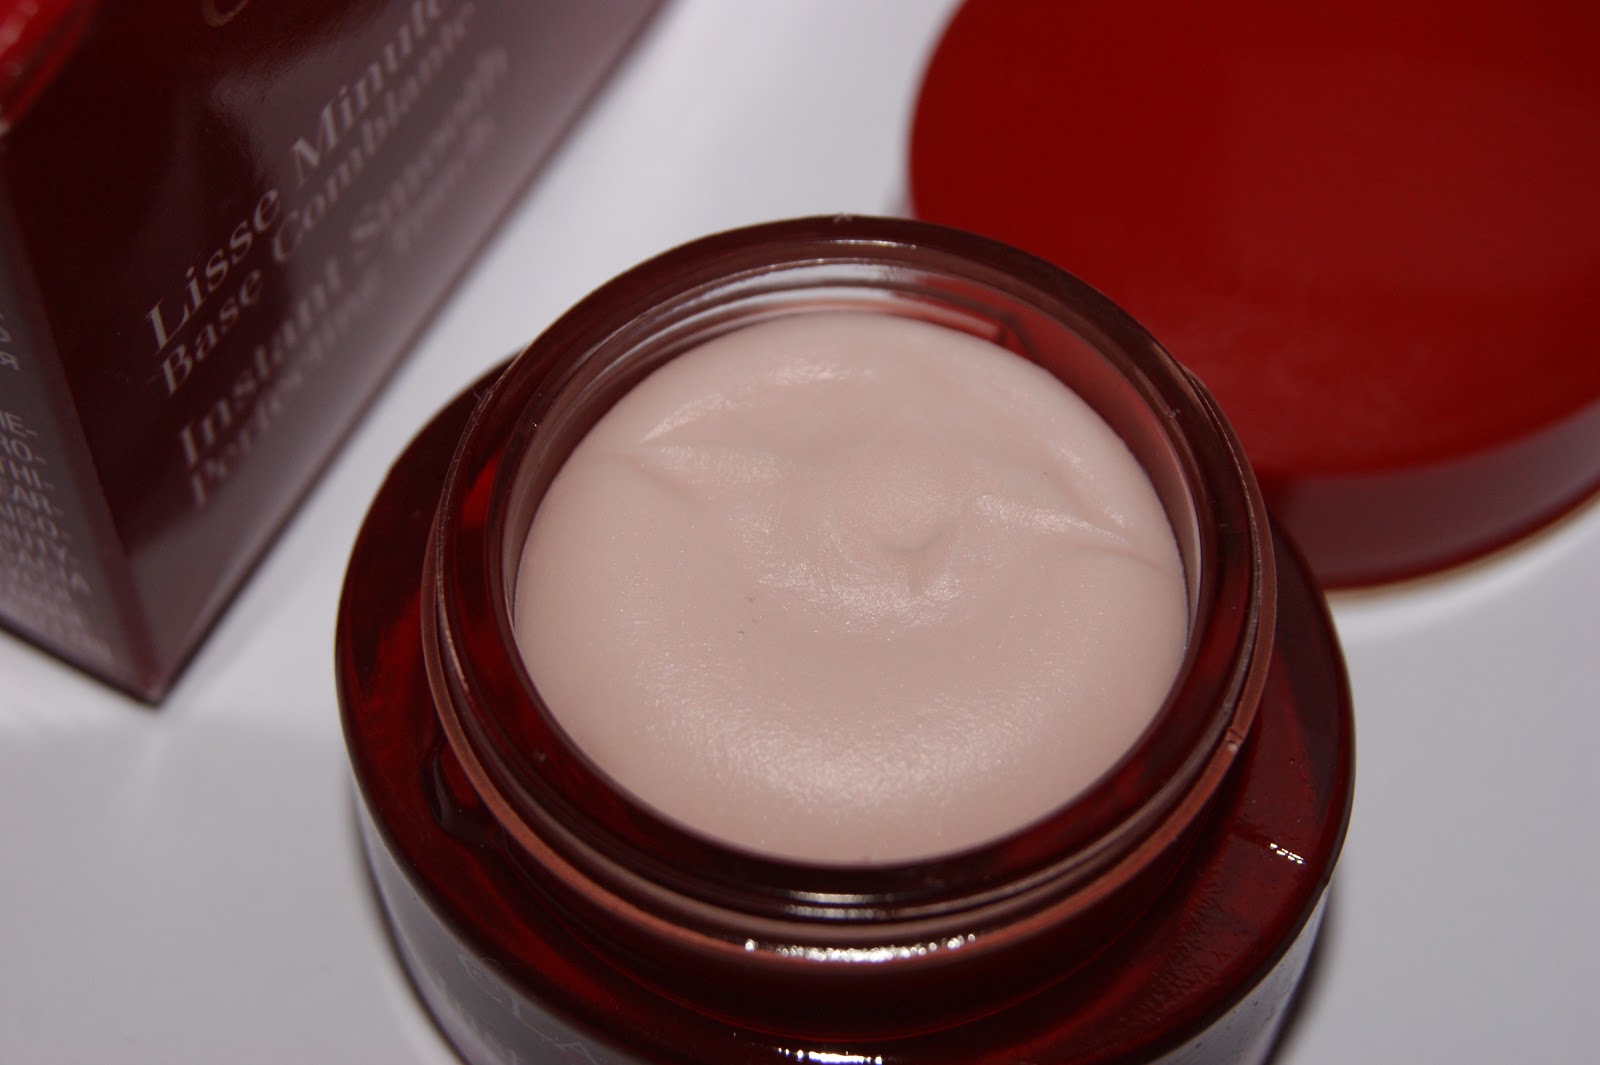 Clarins Instant Smooth Perfecting Touch Primer - Review